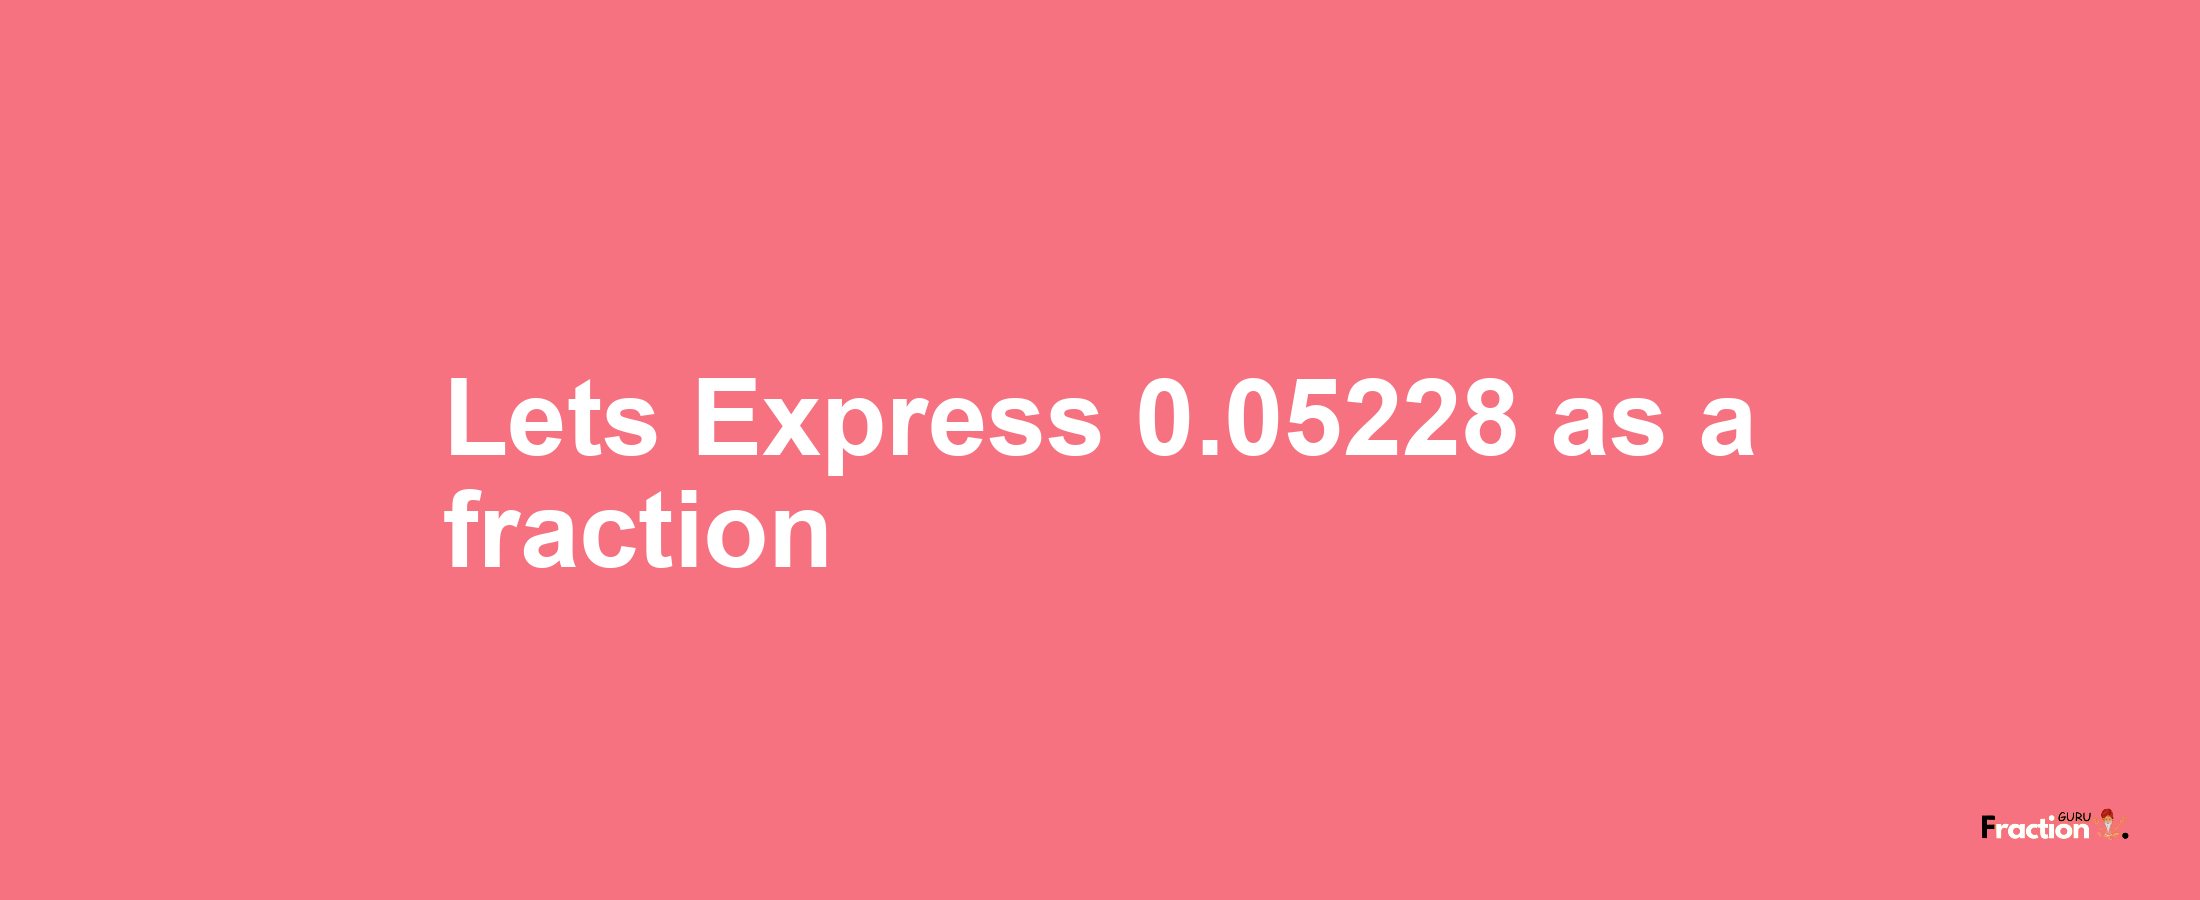 Lets Express 0.05228 as afraction